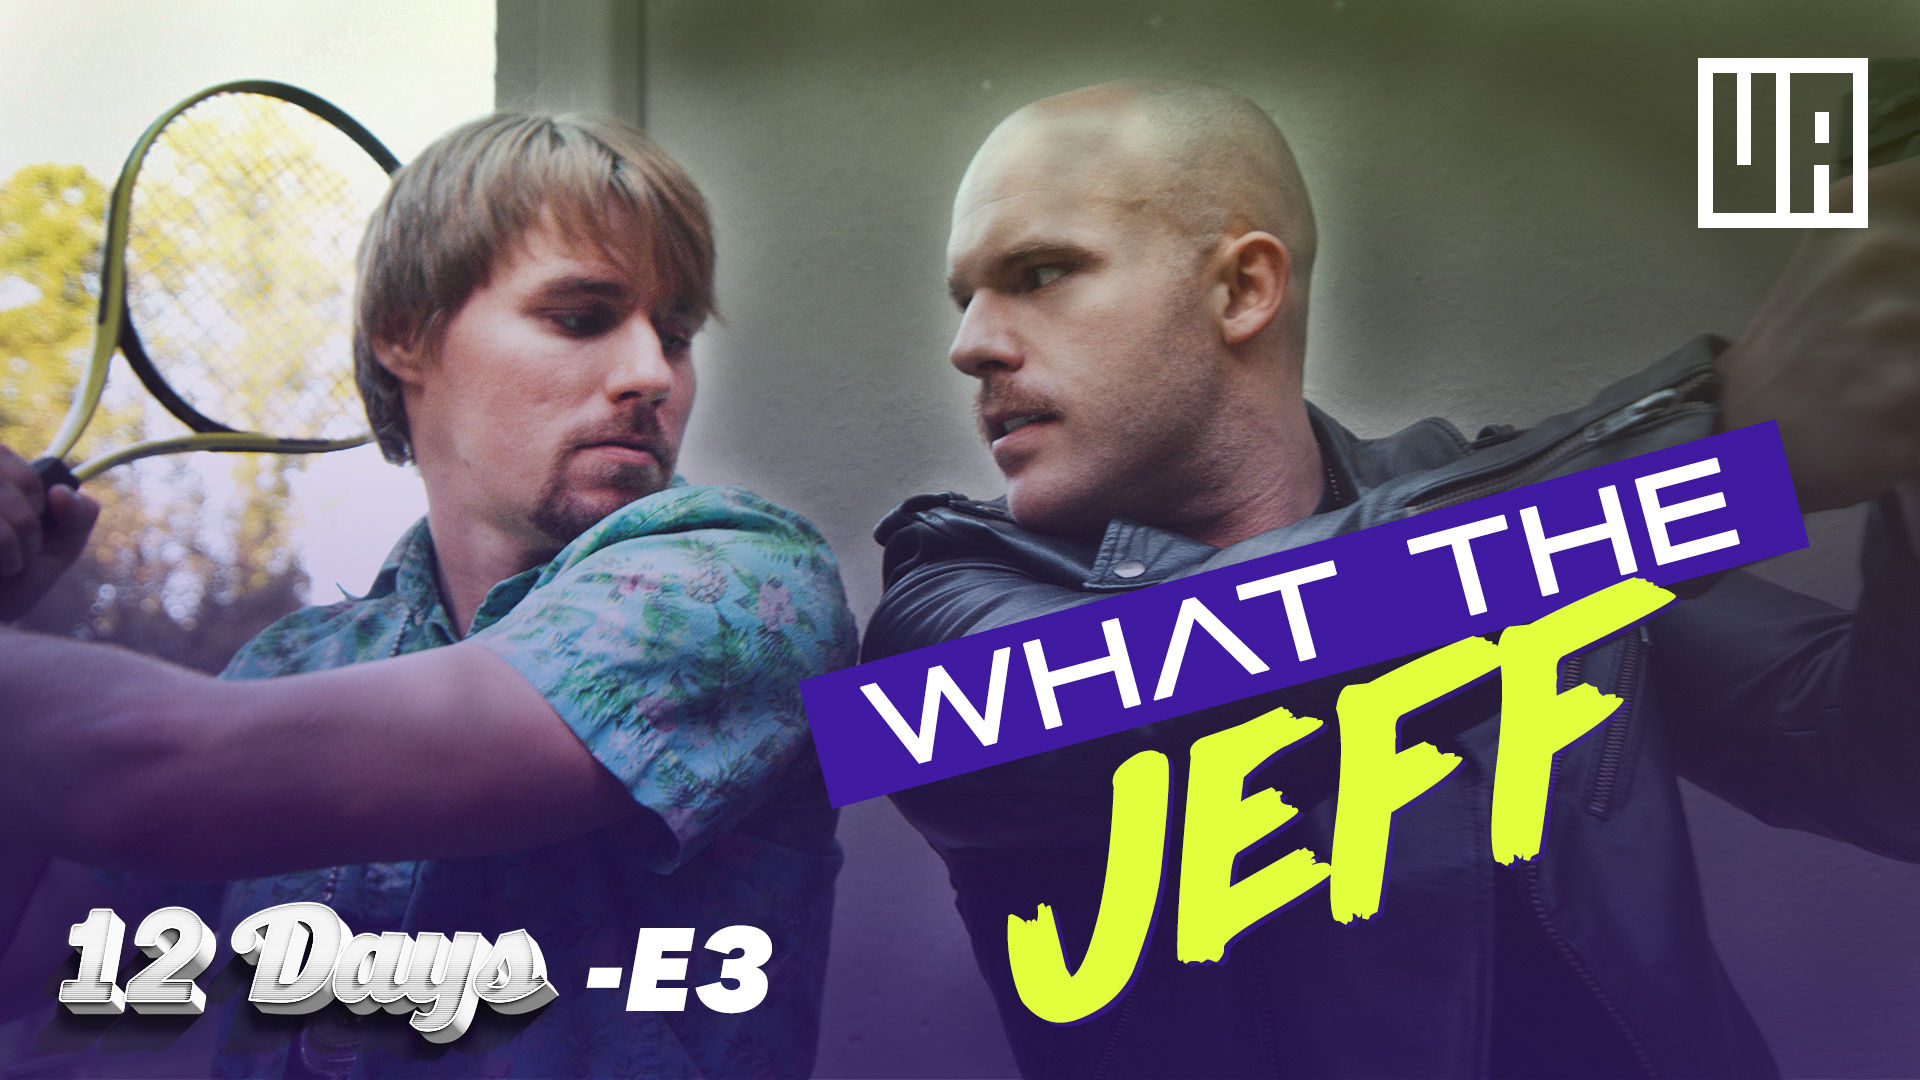 E3 - What the Jeff? - "My Case"